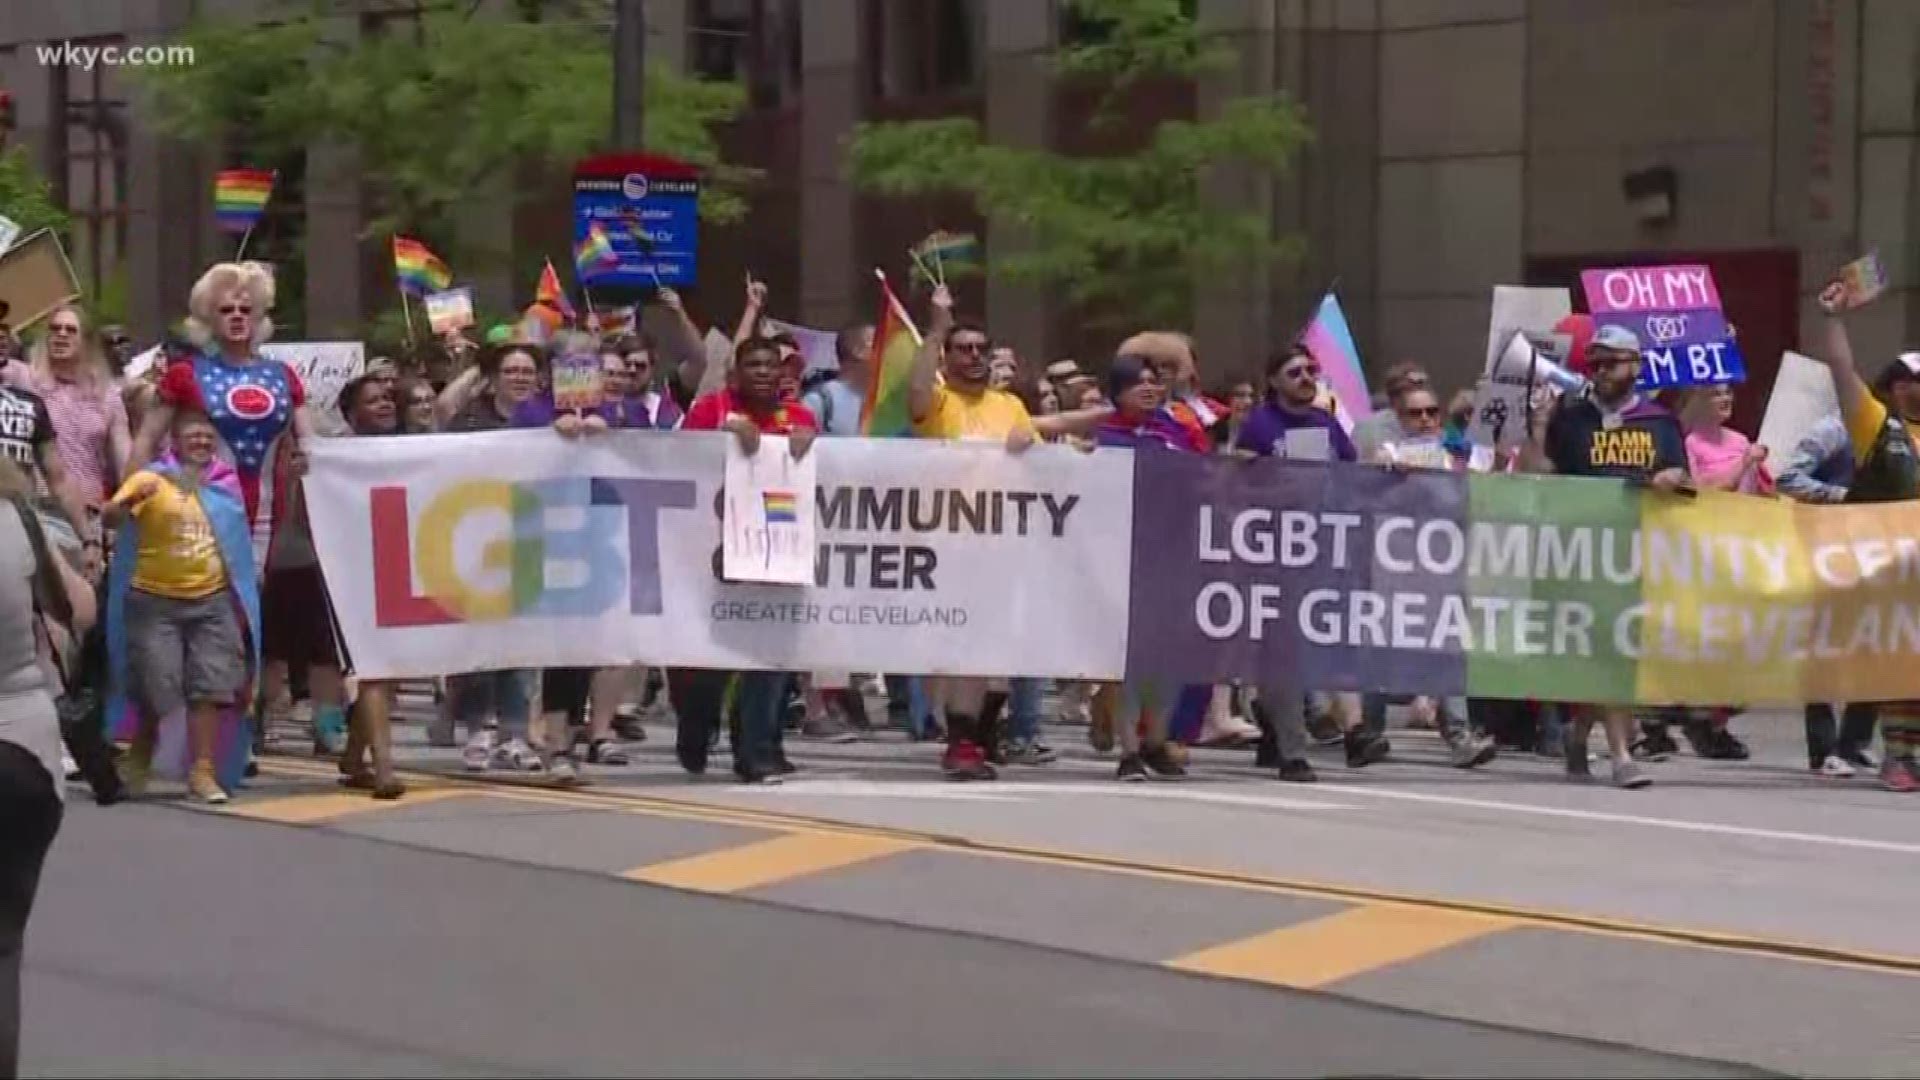 When is Flat Out Pride and Pride in CLE?